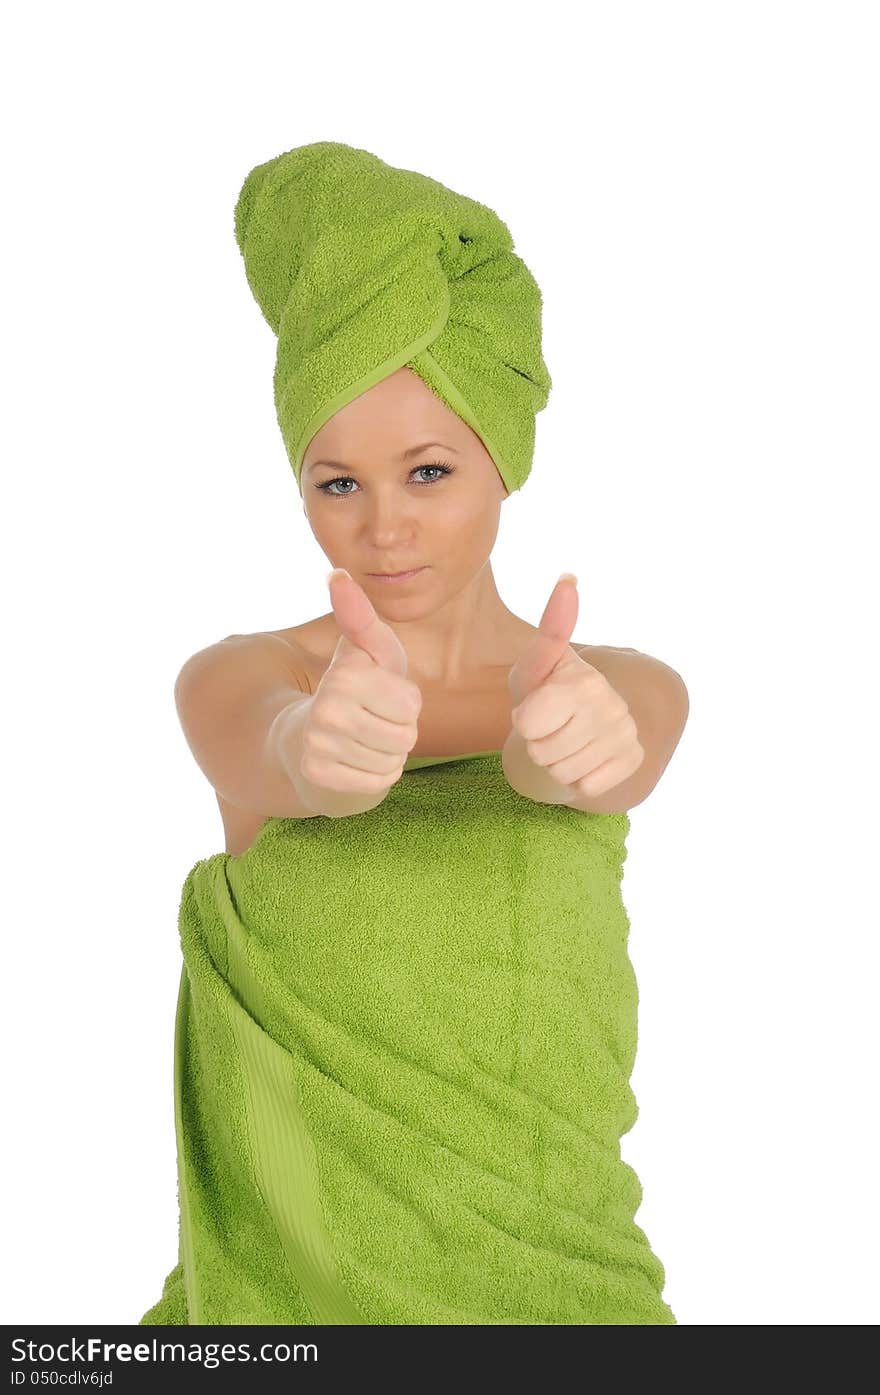 Spa Girl. Beautiful Young Woman After Bath with green towel. isolated on white.